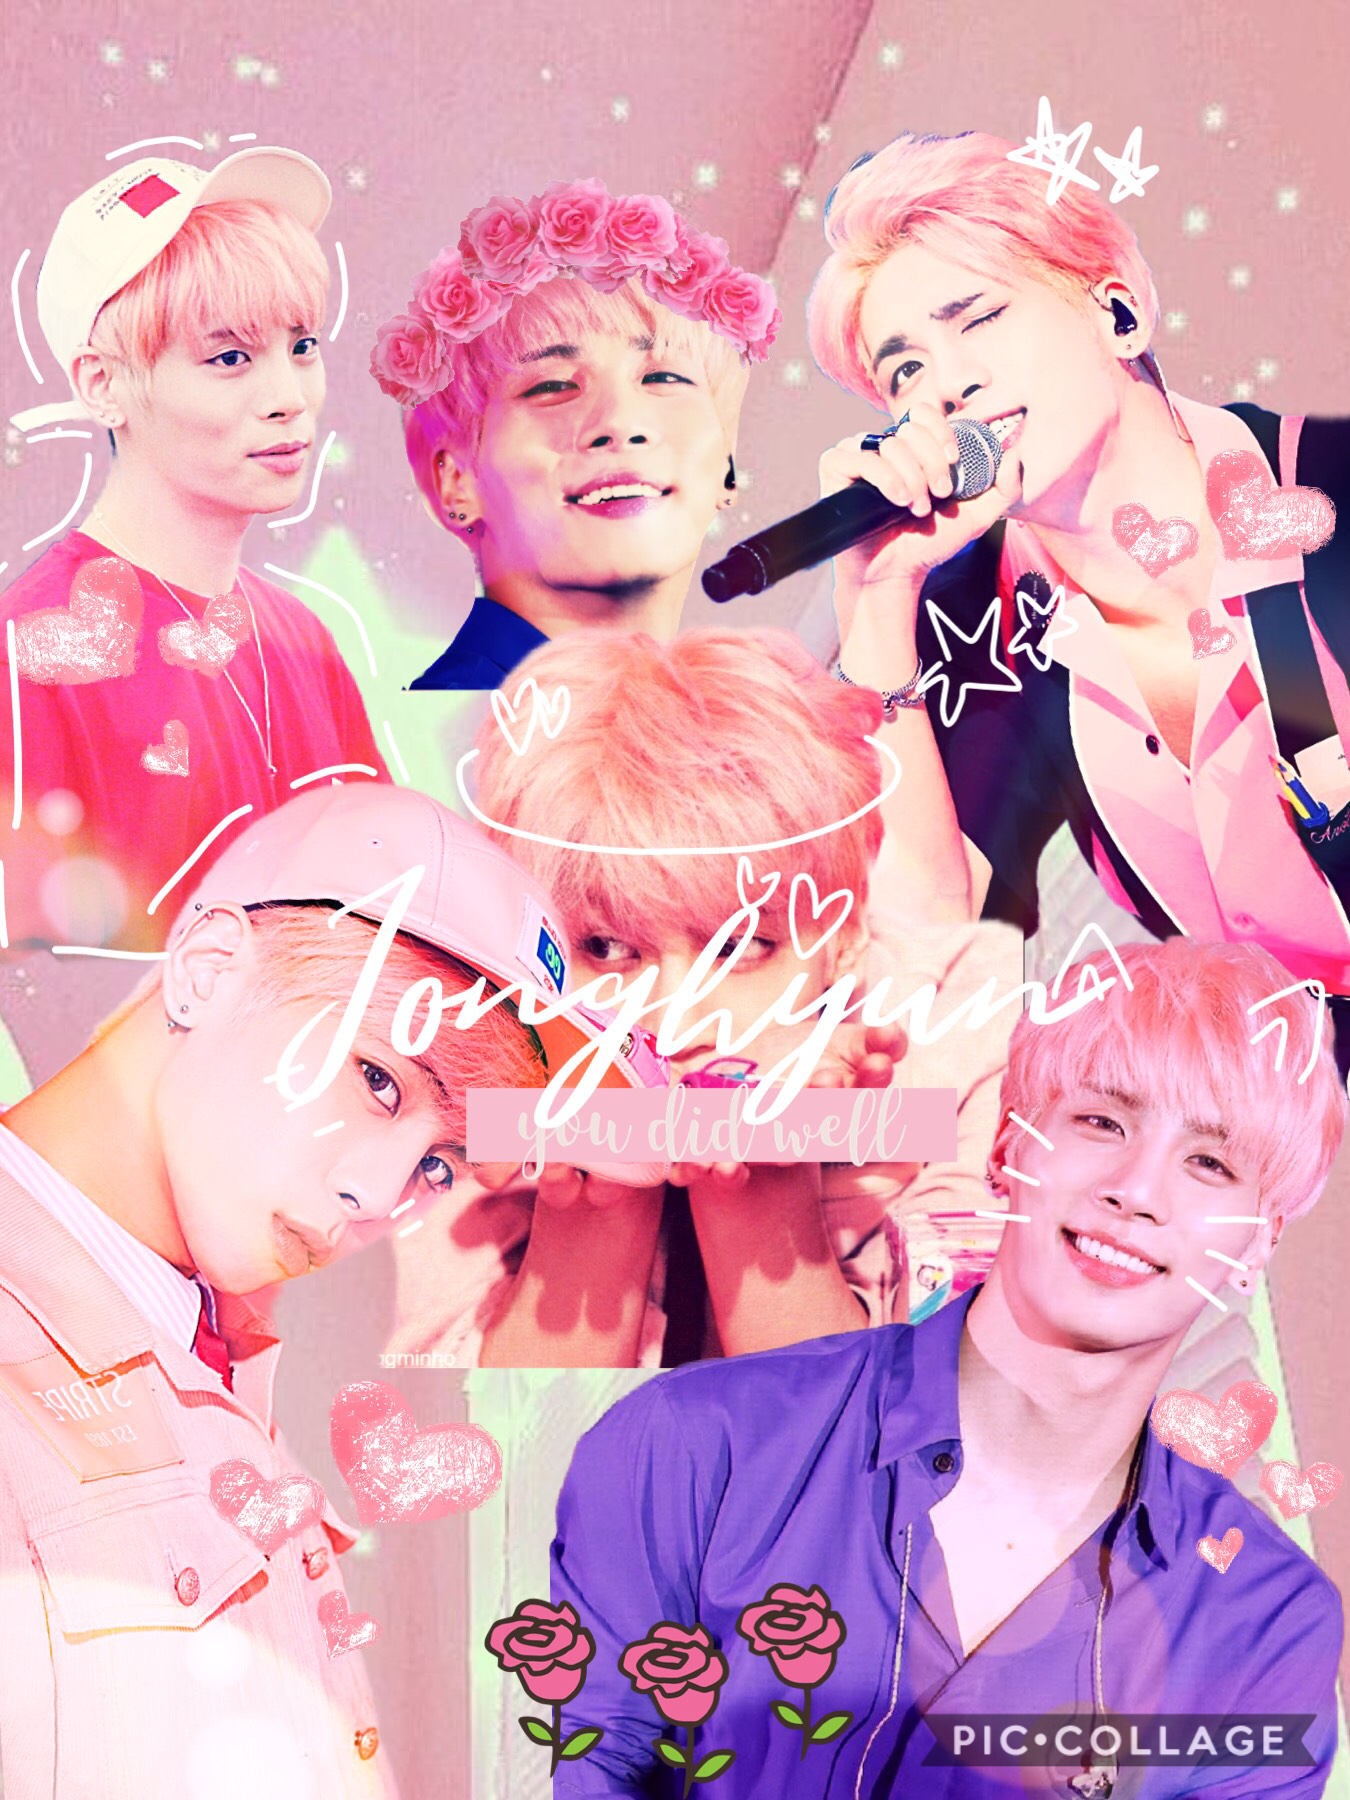 I didn't learn about Jonghyun's death until late November of last year (2018), so I wasn't aware of his death until fairly recently, but I really wanted to make this for him. (I wasn't even aware of Kpop in 2017)